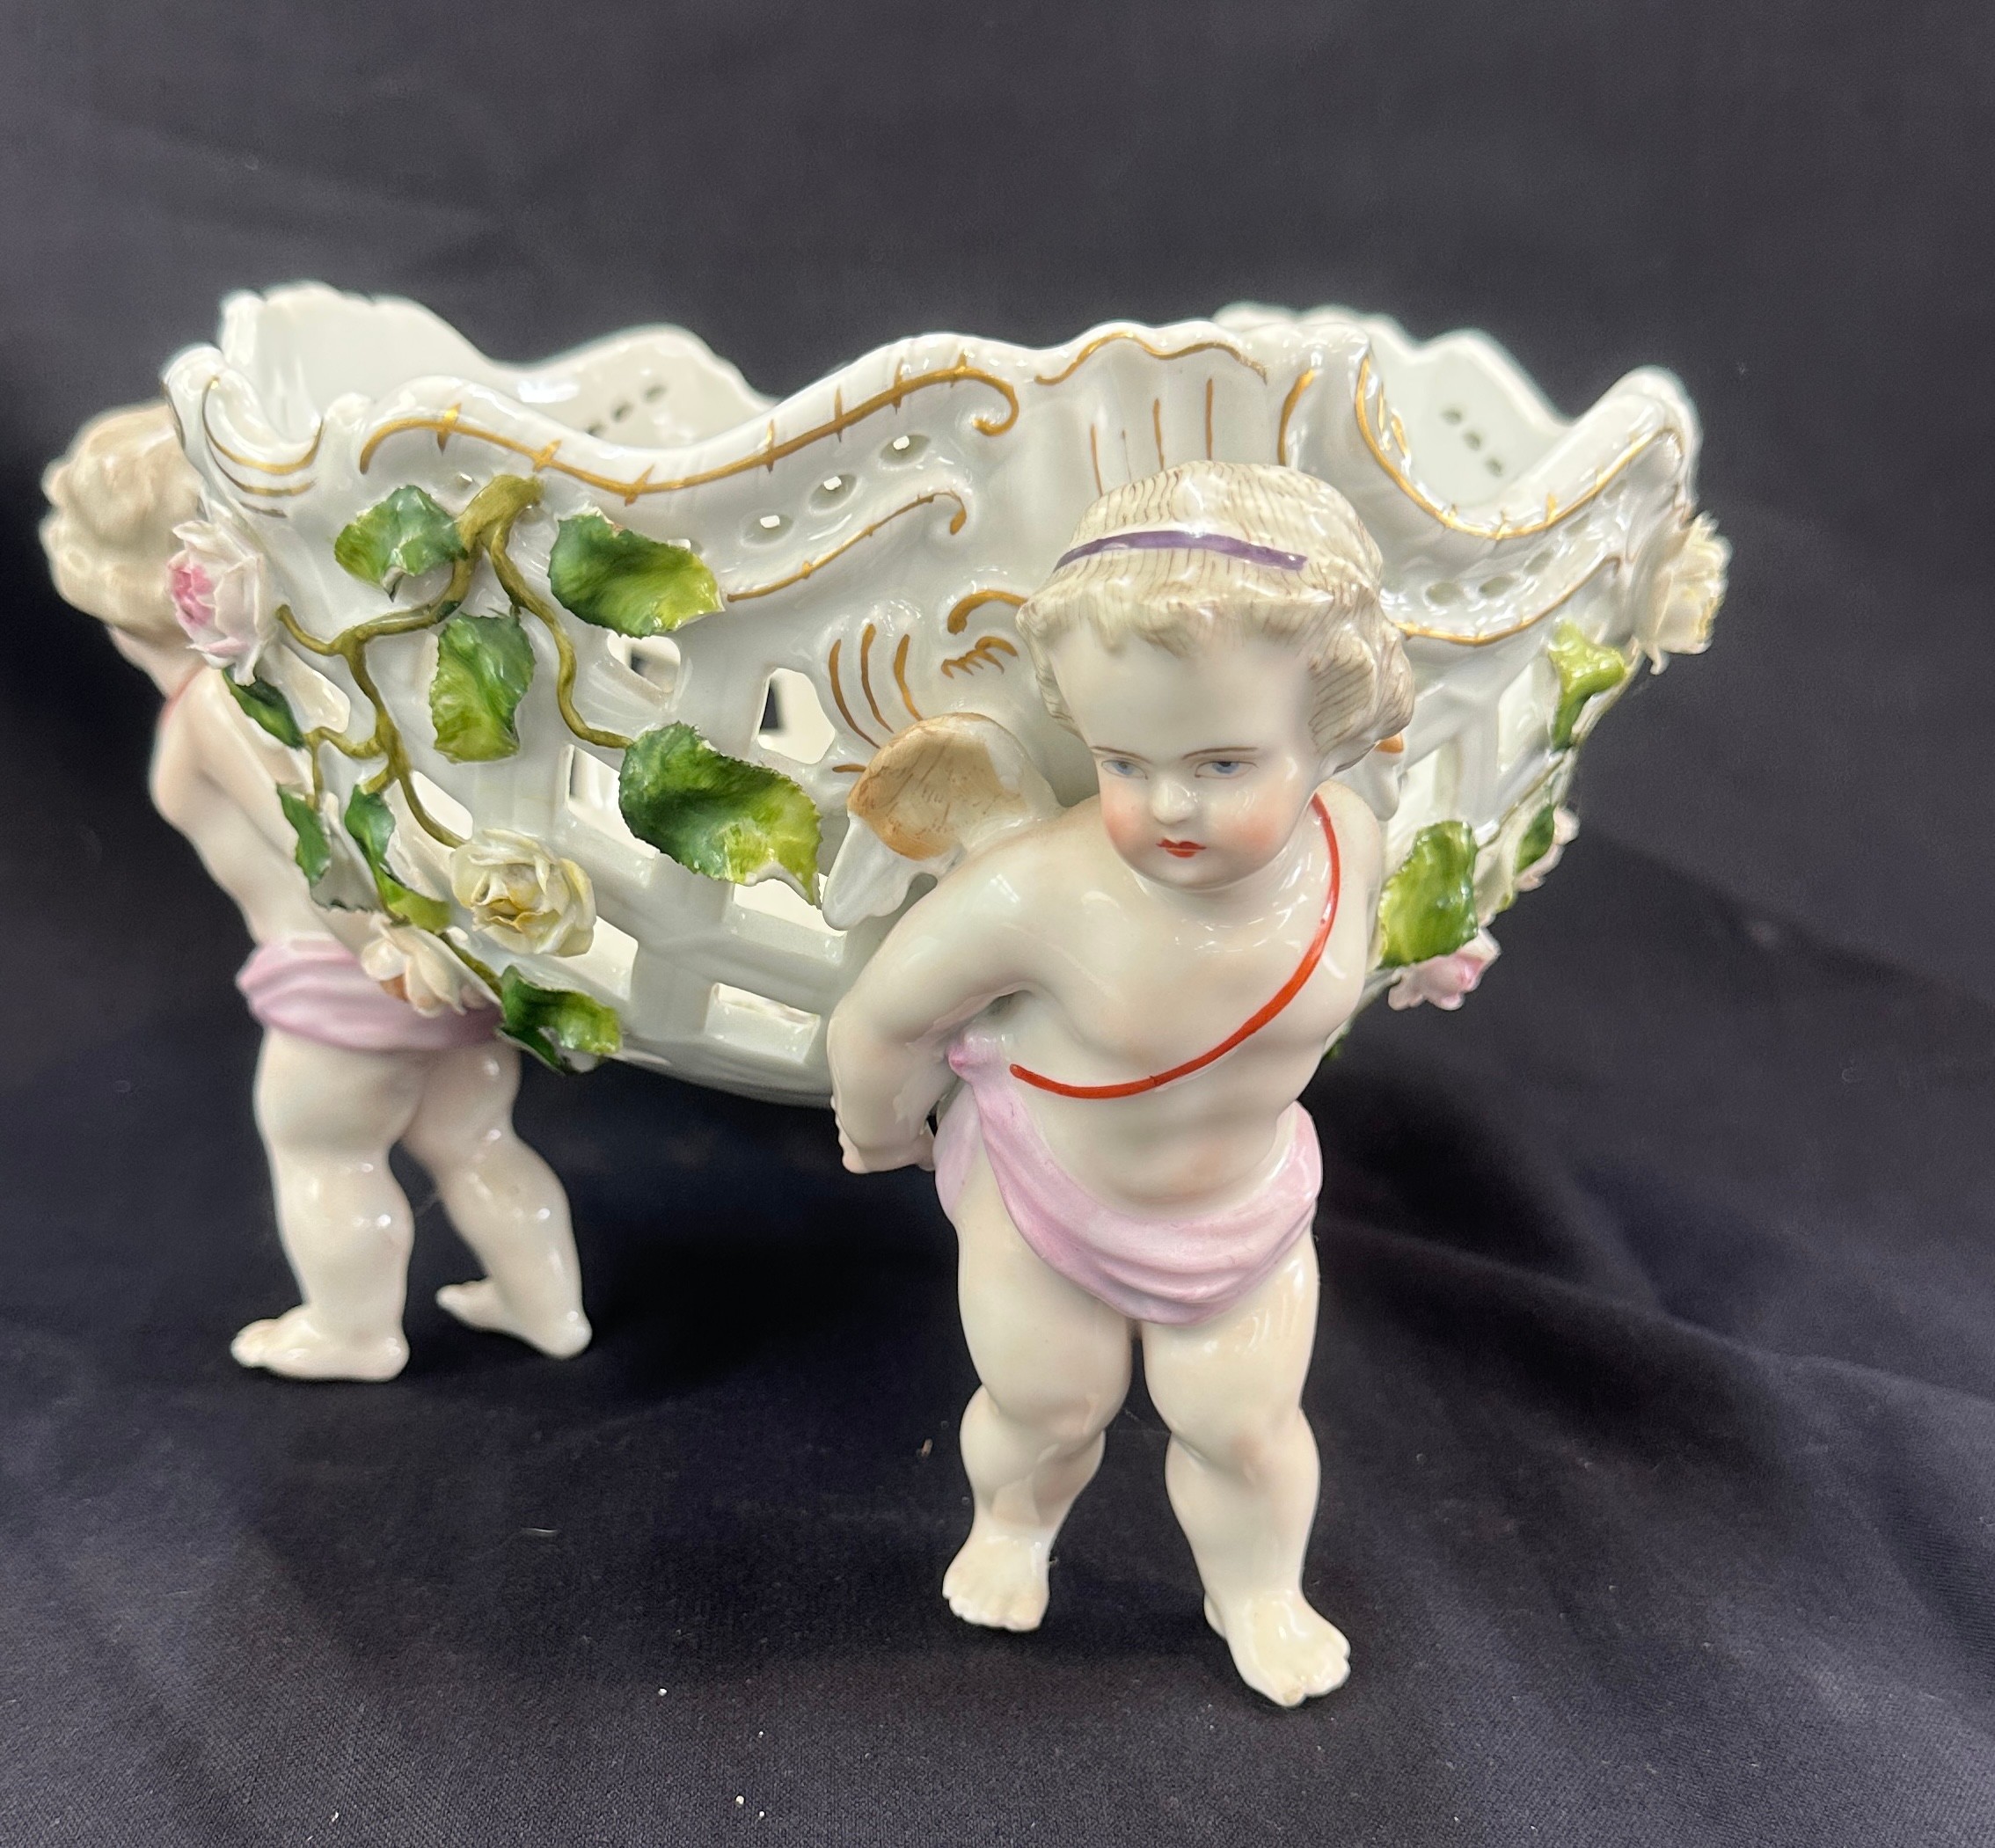 Meissen style small cherub bowl, approximate measurements Diameter 6 inches, Height 9 inches